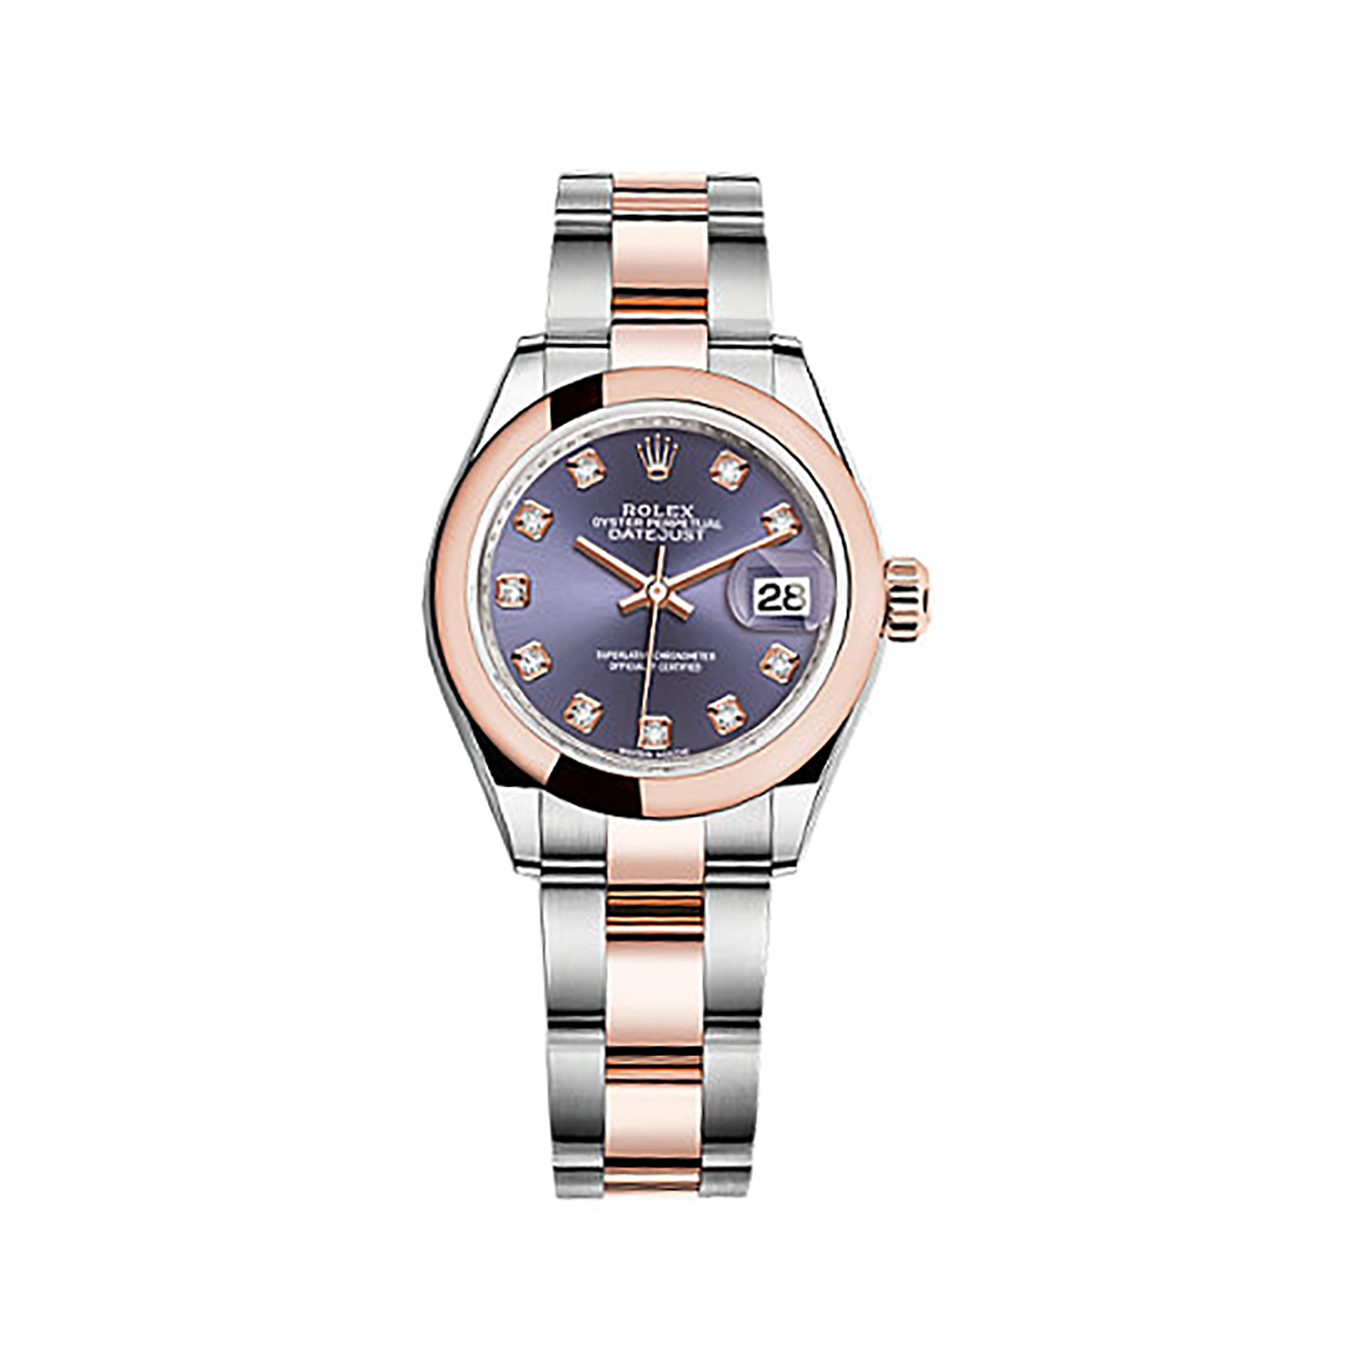 Lady-Datejust 28 279161 Rose Gold & Stainless Steel Watch (Aubergine Set with Diamonds)